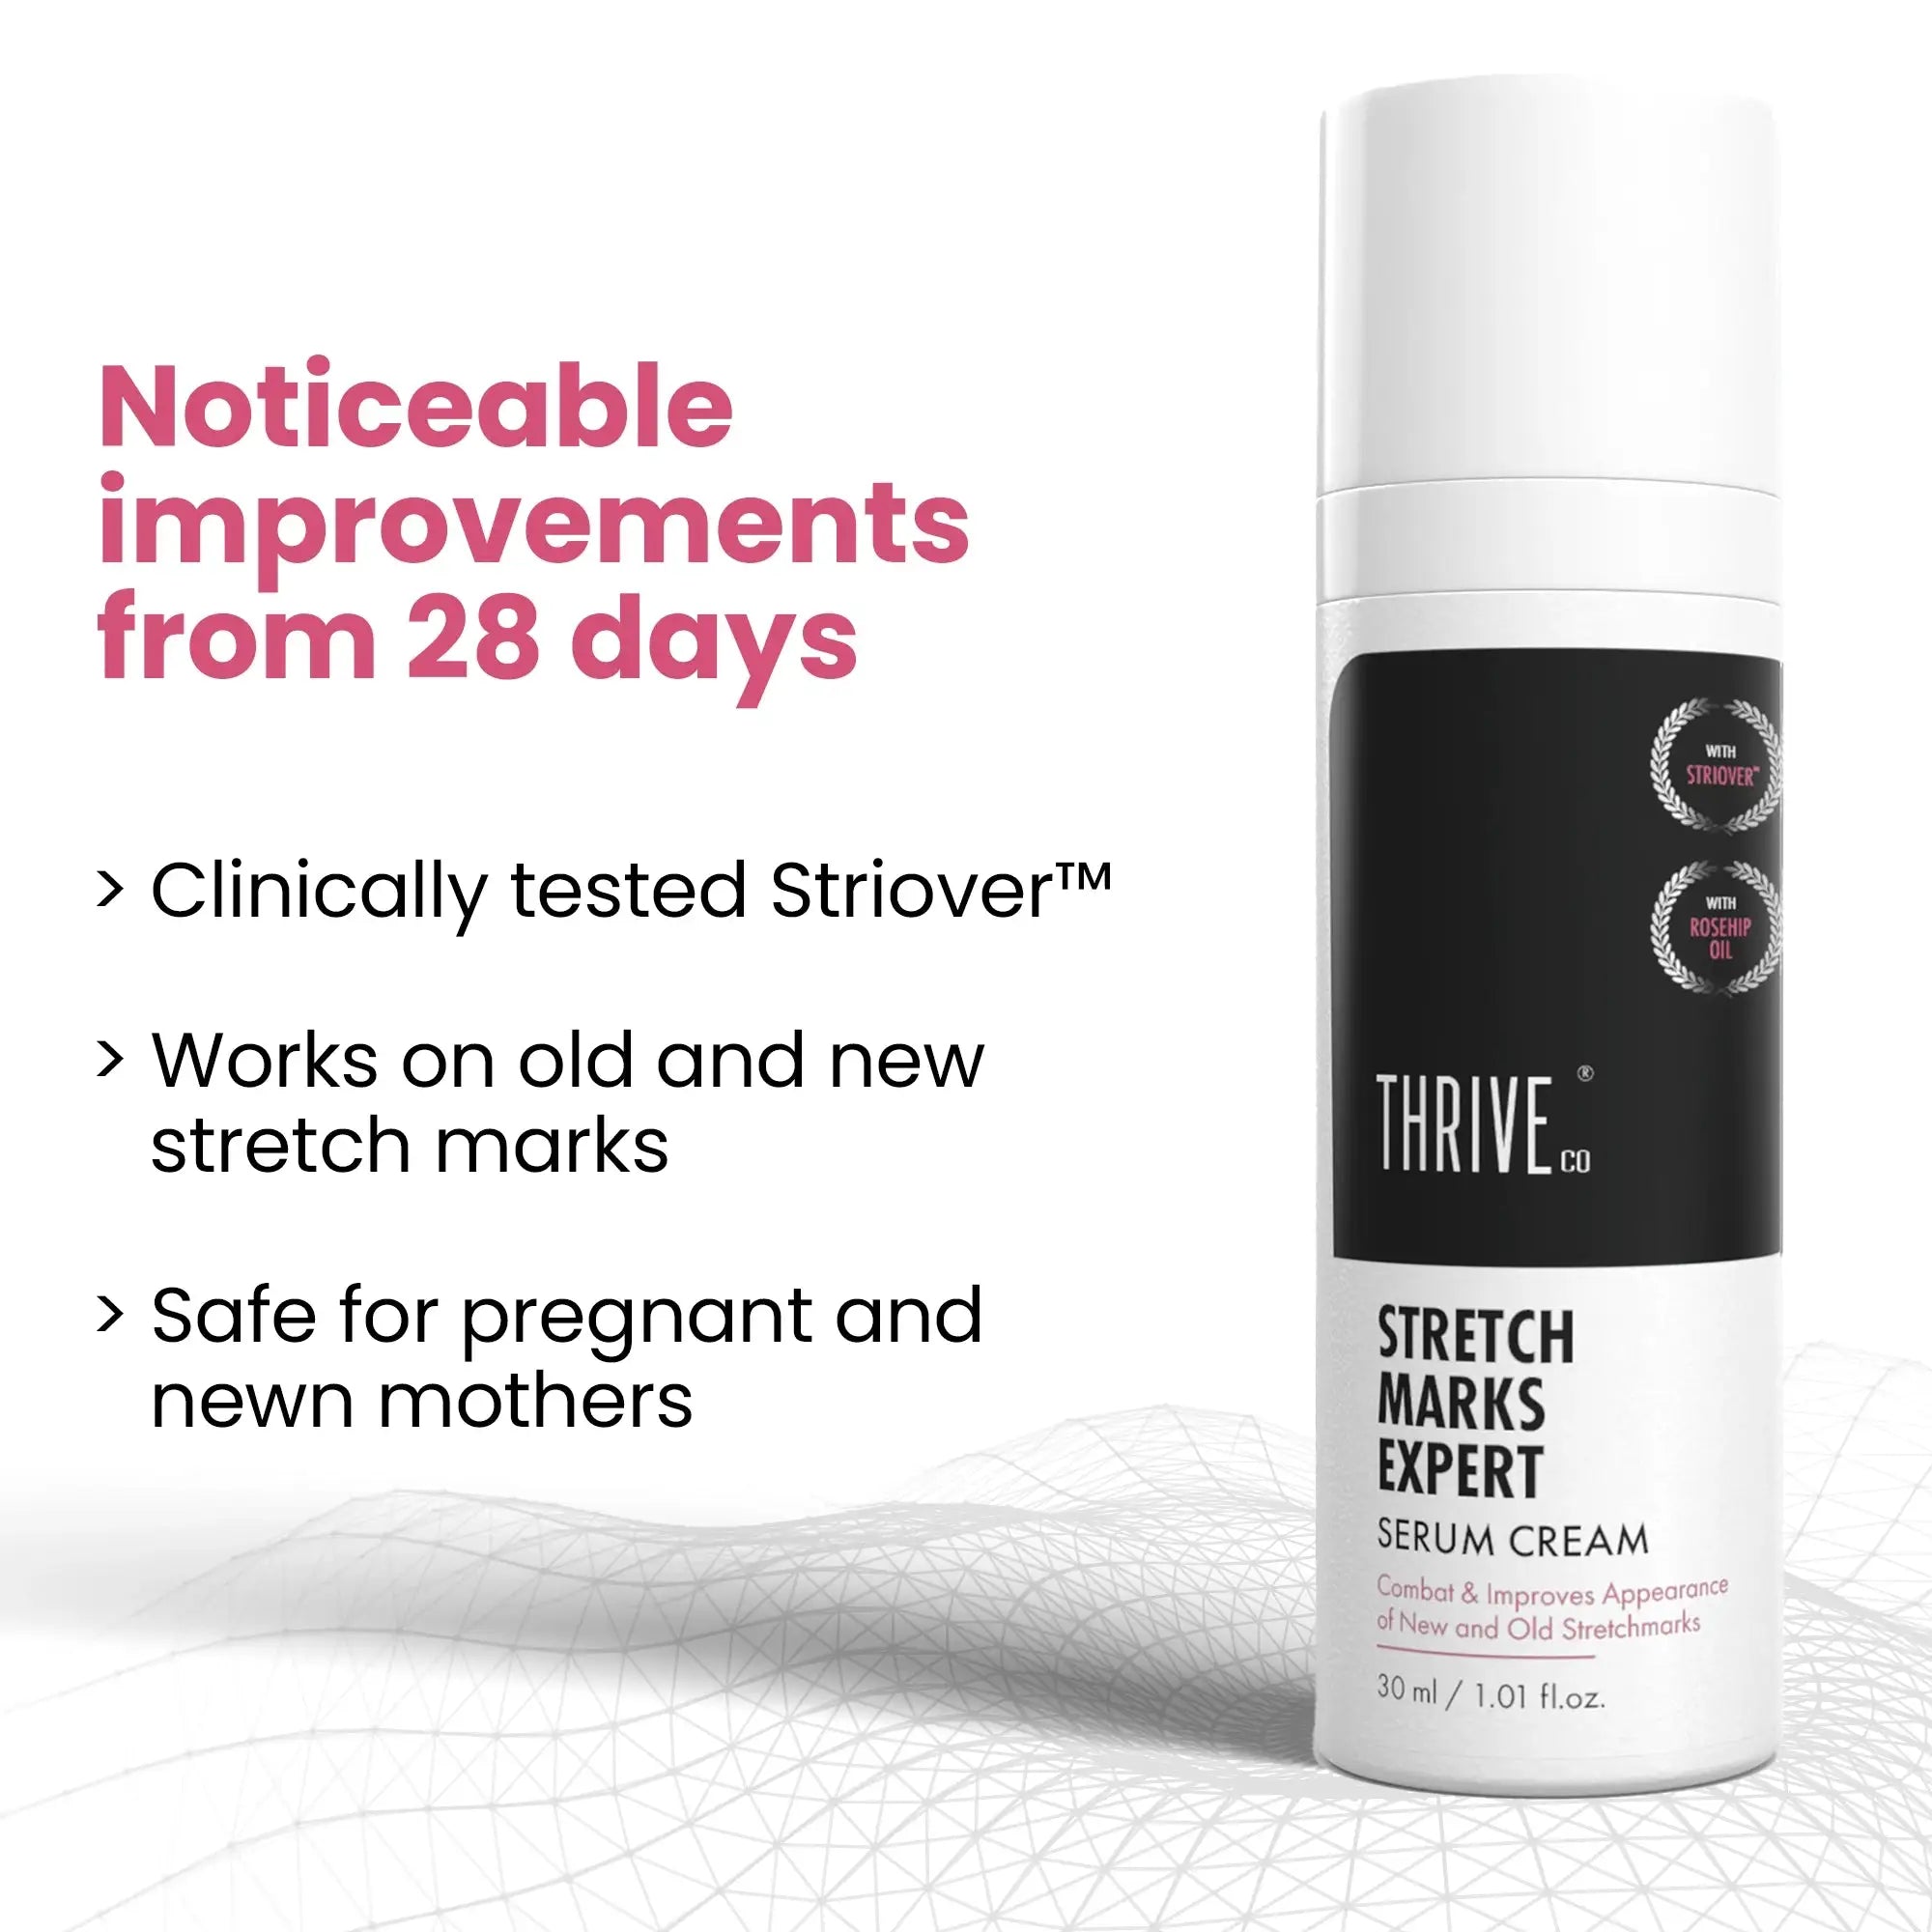 thriveco stretch mark removal cream to reduce appearance of old and new stretch marks